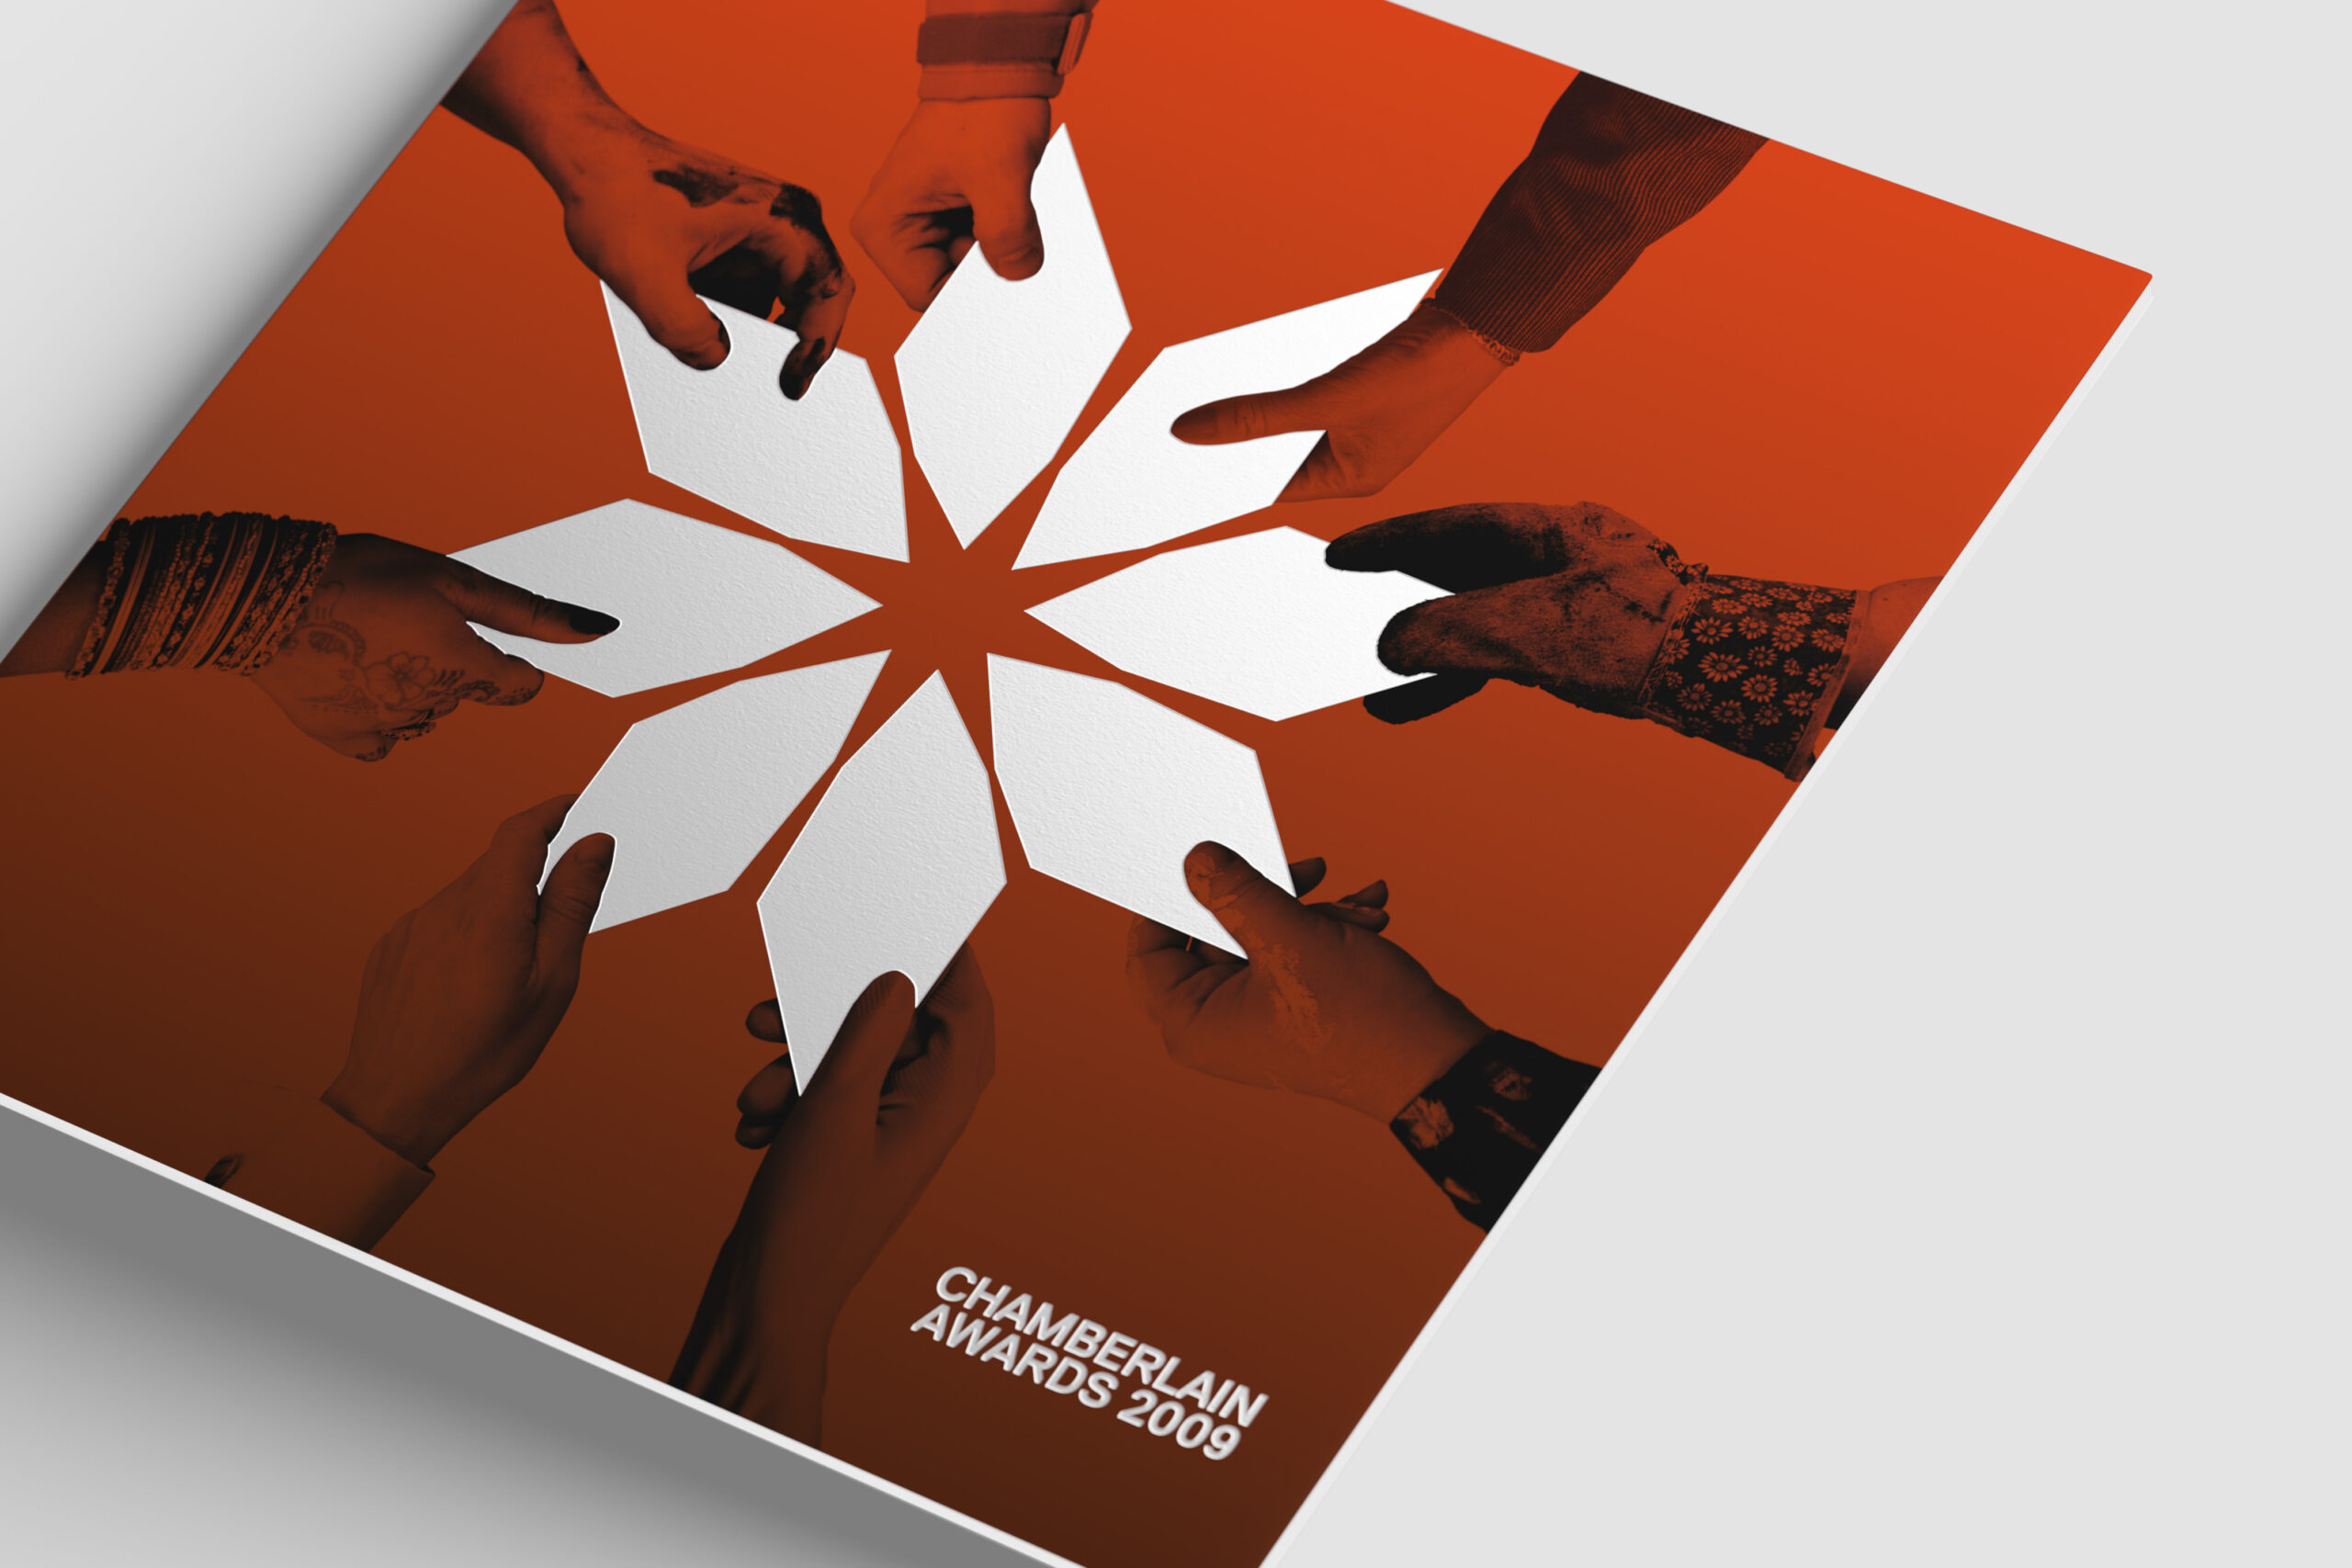 The Chamberlain Awards 2009 brochure sits on a neutral grey background. The cover image is printed in shades of orange on a heavy uncoated board. The star-shaped logo sits at the centre, embossed in white. The logo is made of of diamond-shaped lozenges held by people in a variety of clothing and gloves.